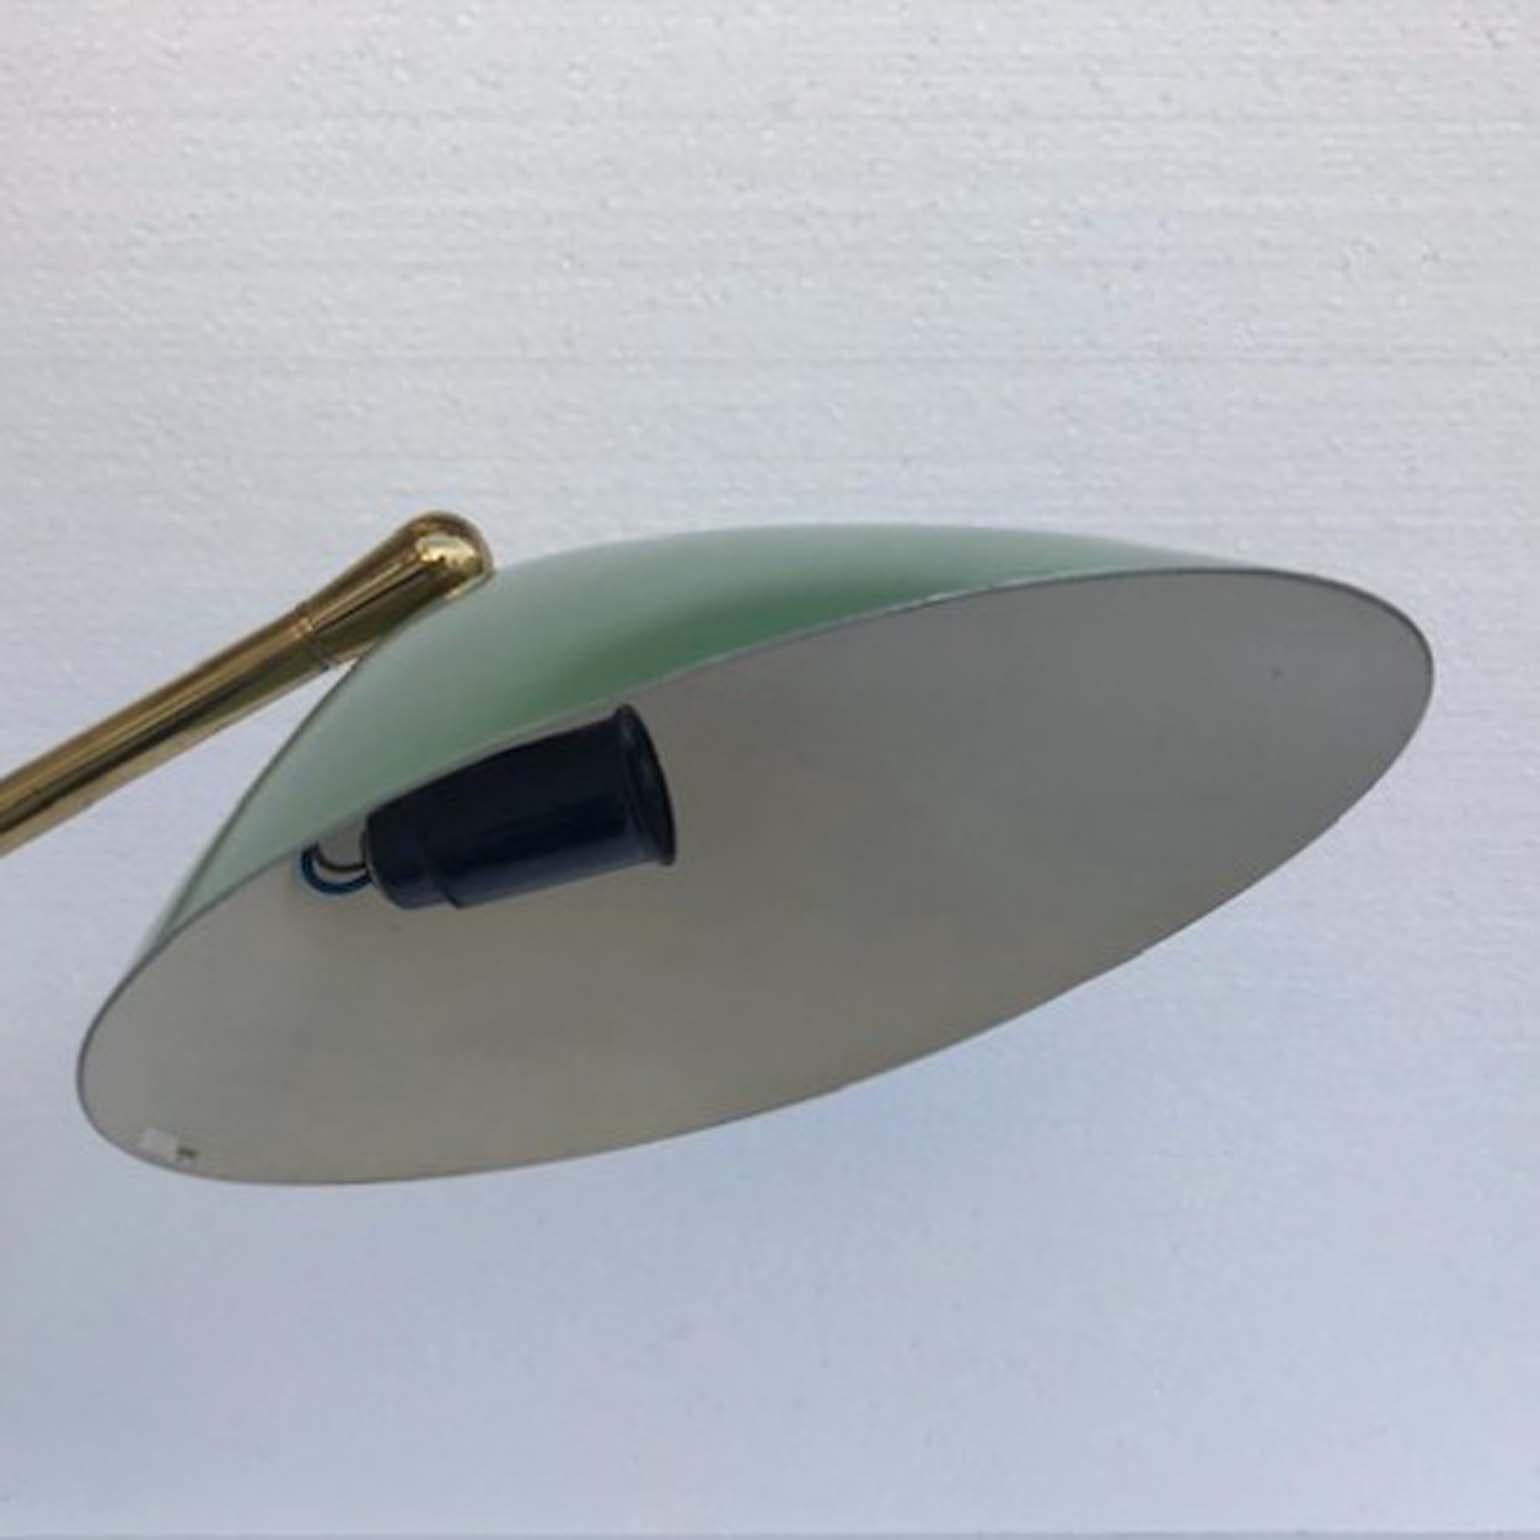 Mid-20th Century Green and Brass Desk or Table Light, Stillux Italy 1950s on Marble Foot